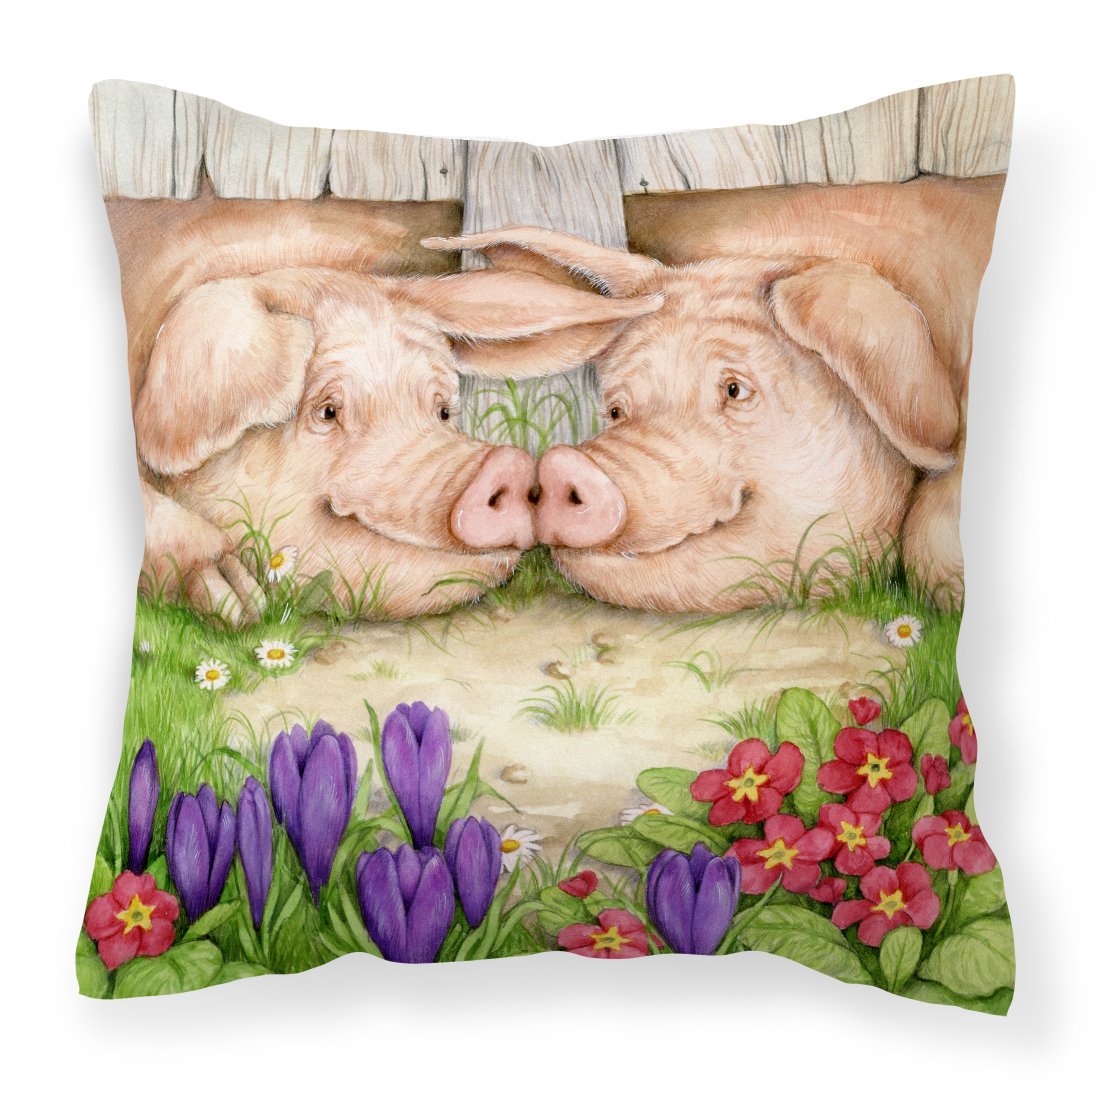 Pigs Nose To Nose by Debbie Cook Canvas Decorative Pillow by Caroline's Treasures